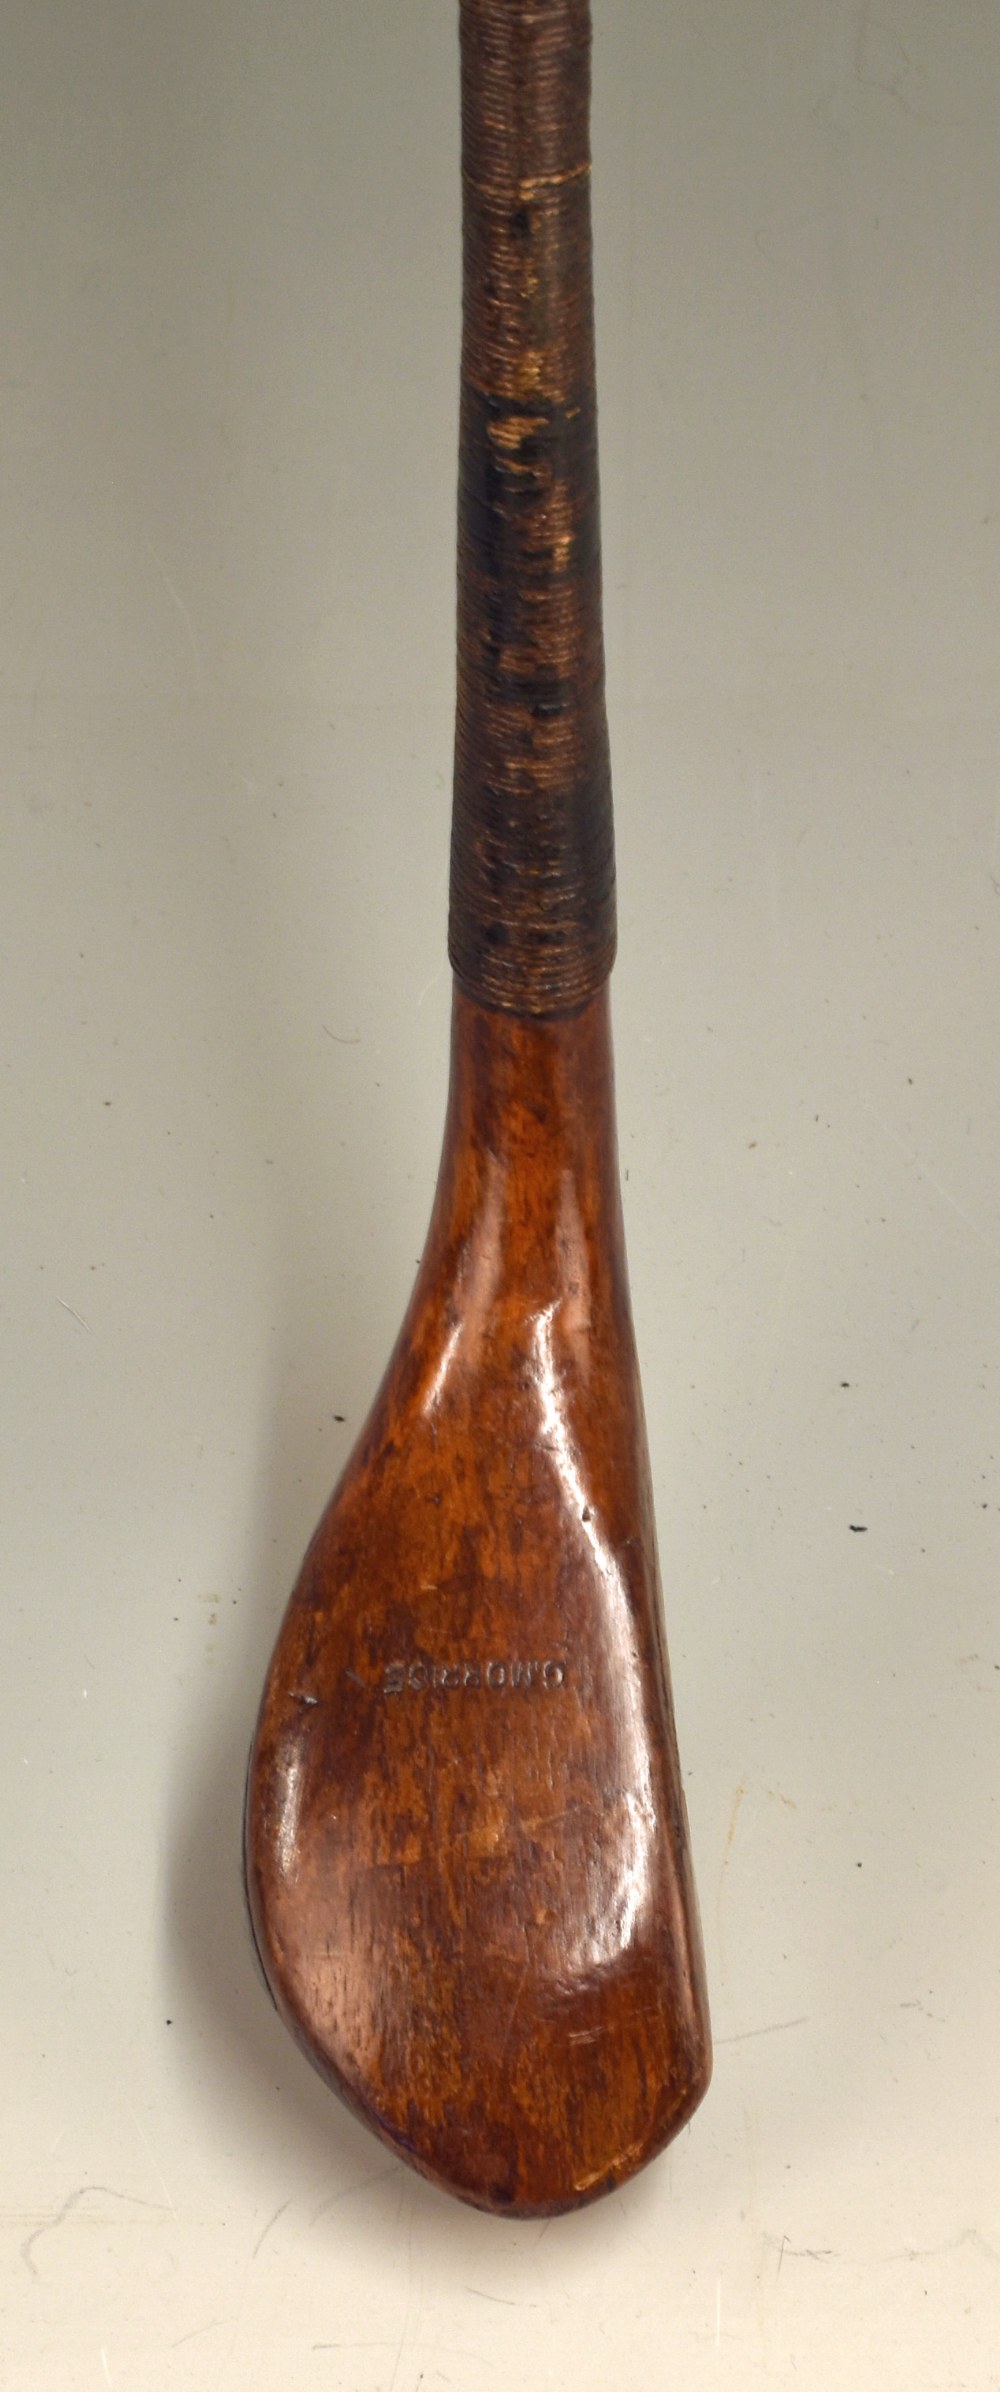 G Morrice late long nose dark stained scare neck driver – with hair grain crack to the face and